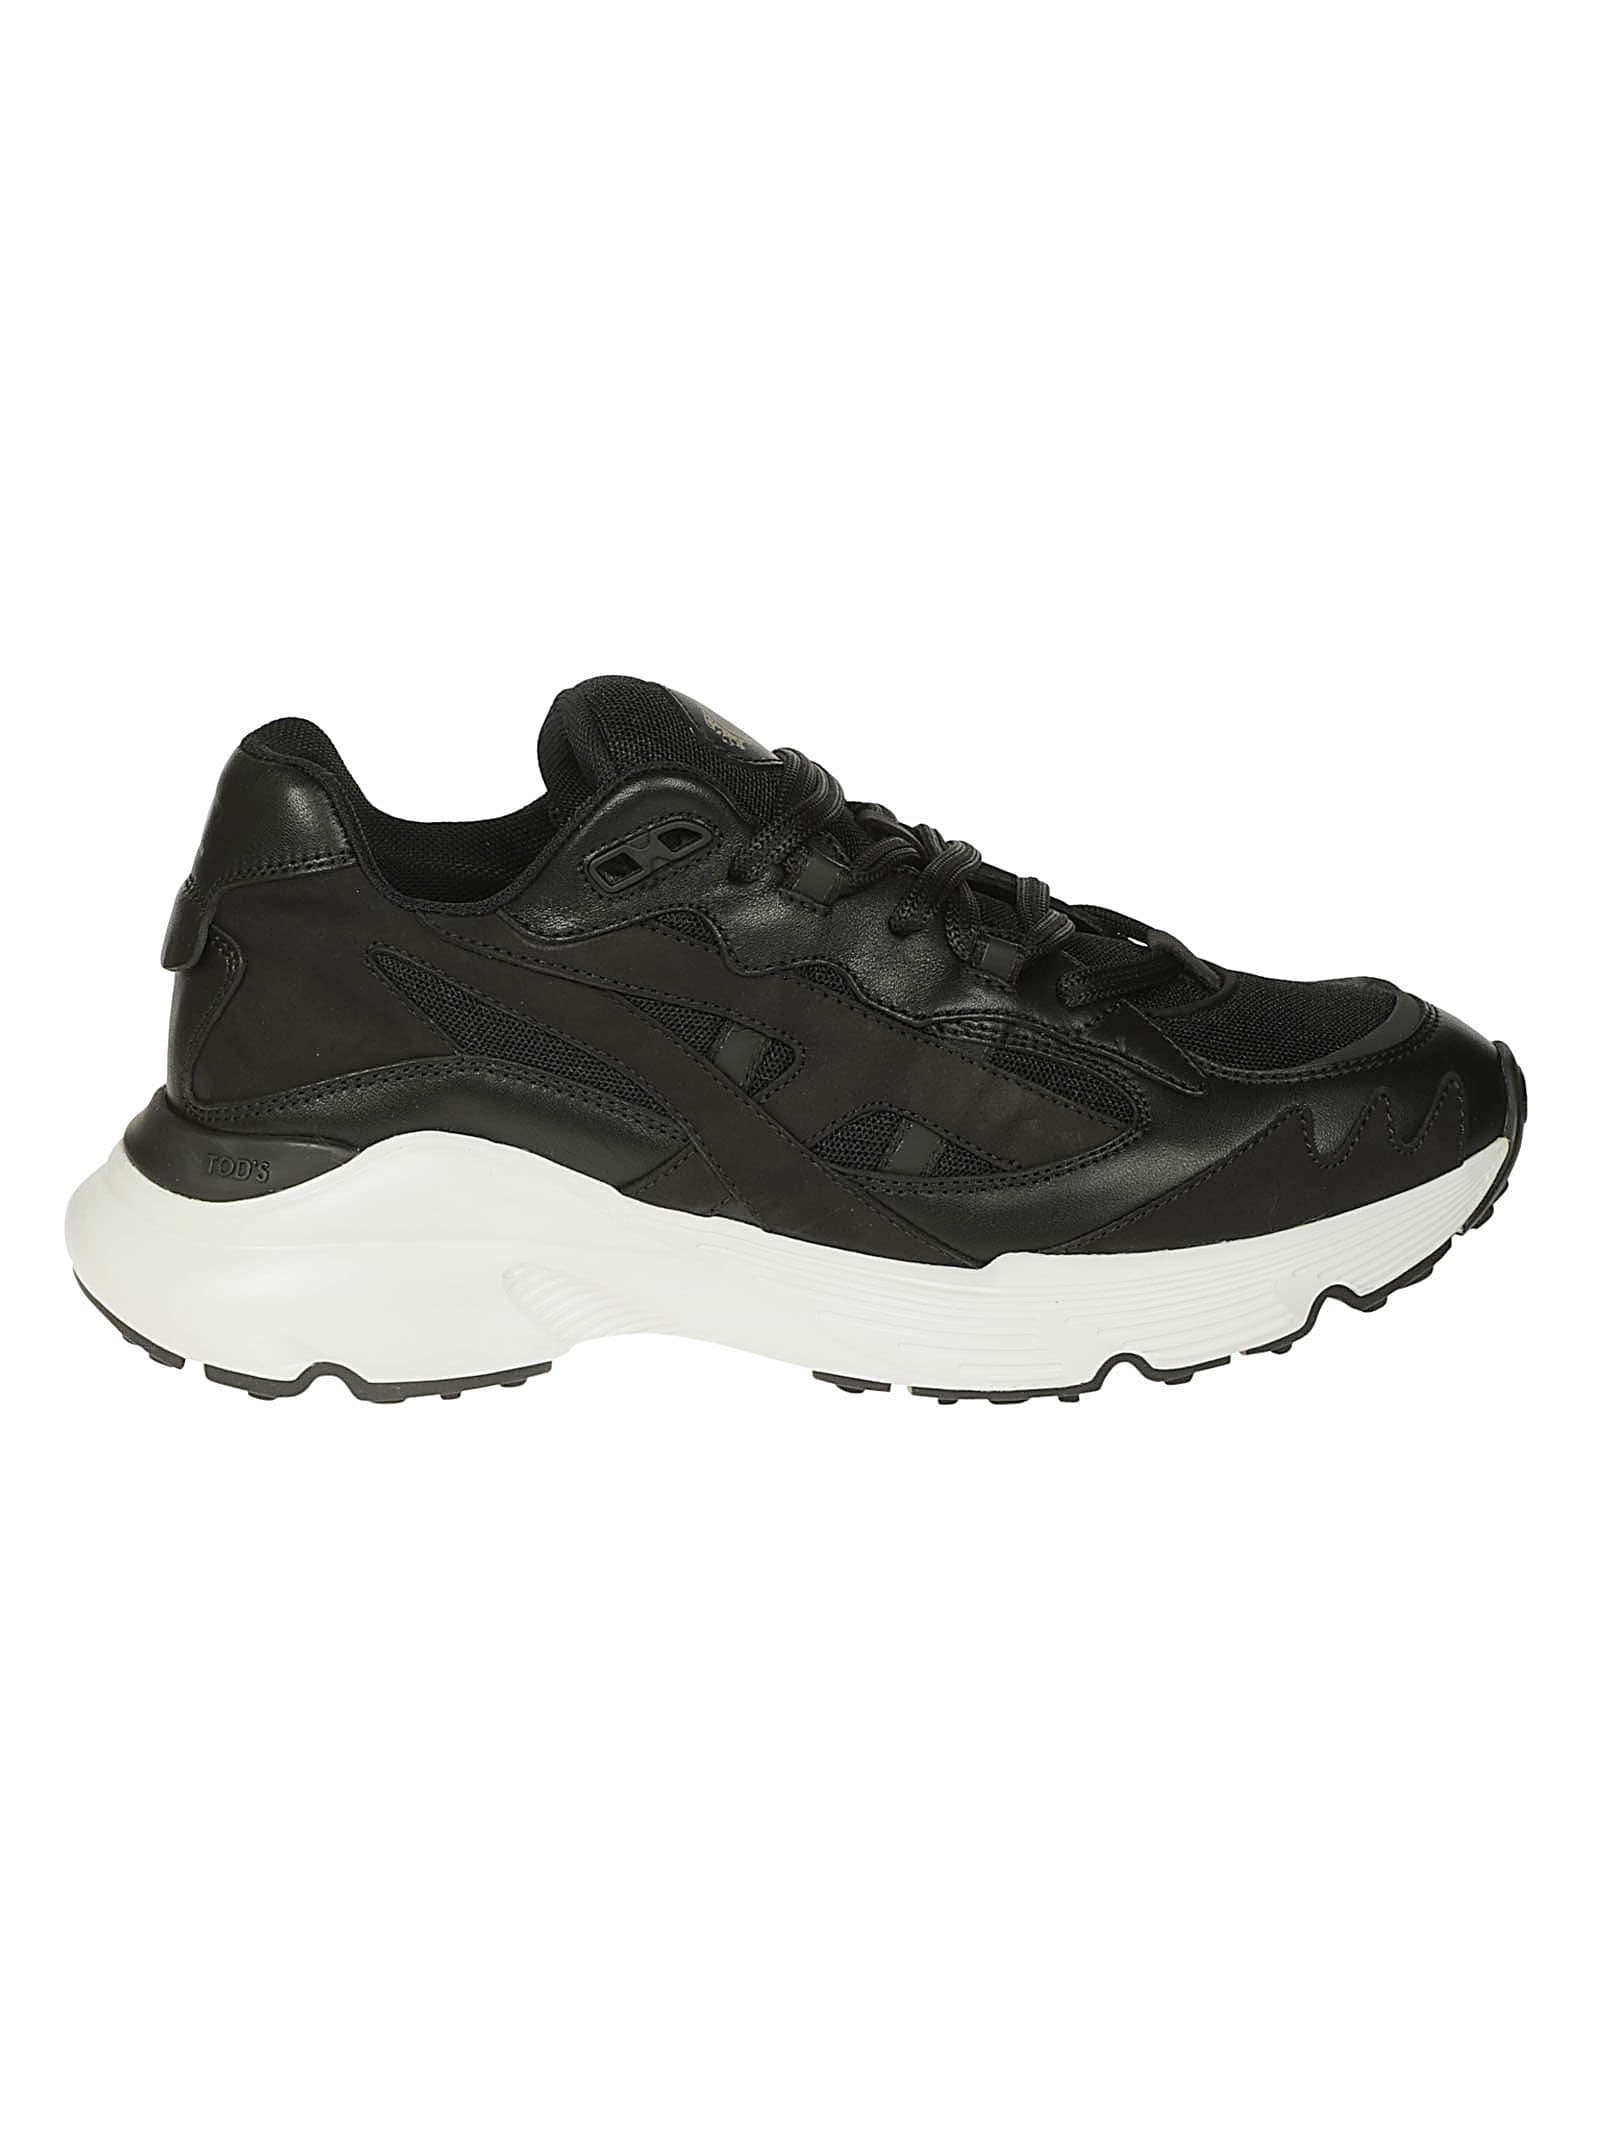 Buy Tods Running Sneakers online, shop Tods shoes with free shipping